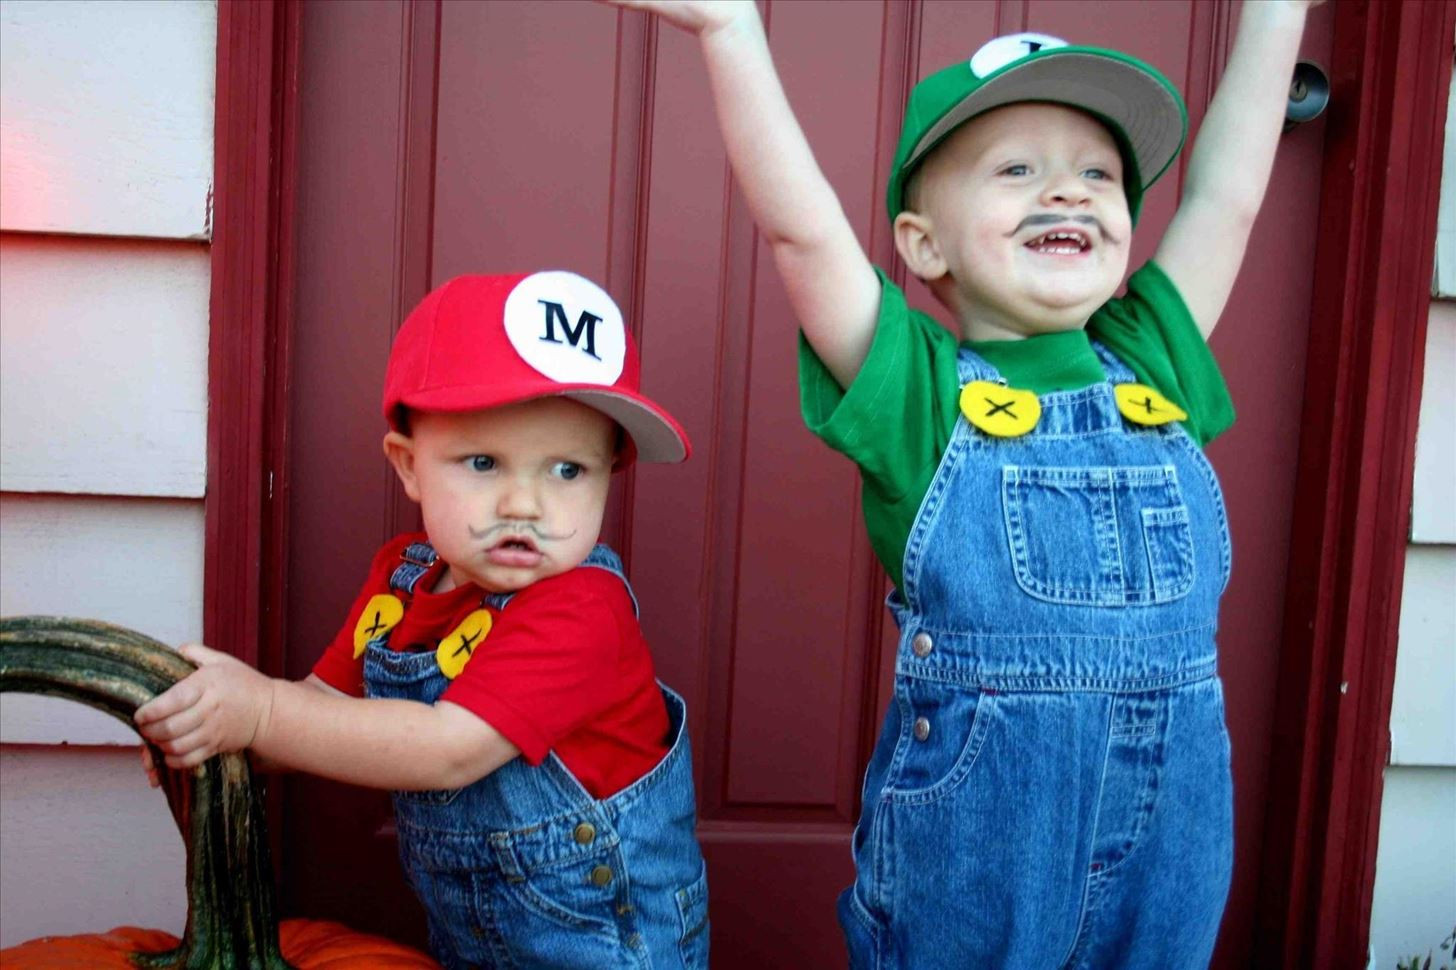 DIY Kids Costume Ideas
 10 Cheap Easy & Awesome DIY Halloween Costumes for Kids